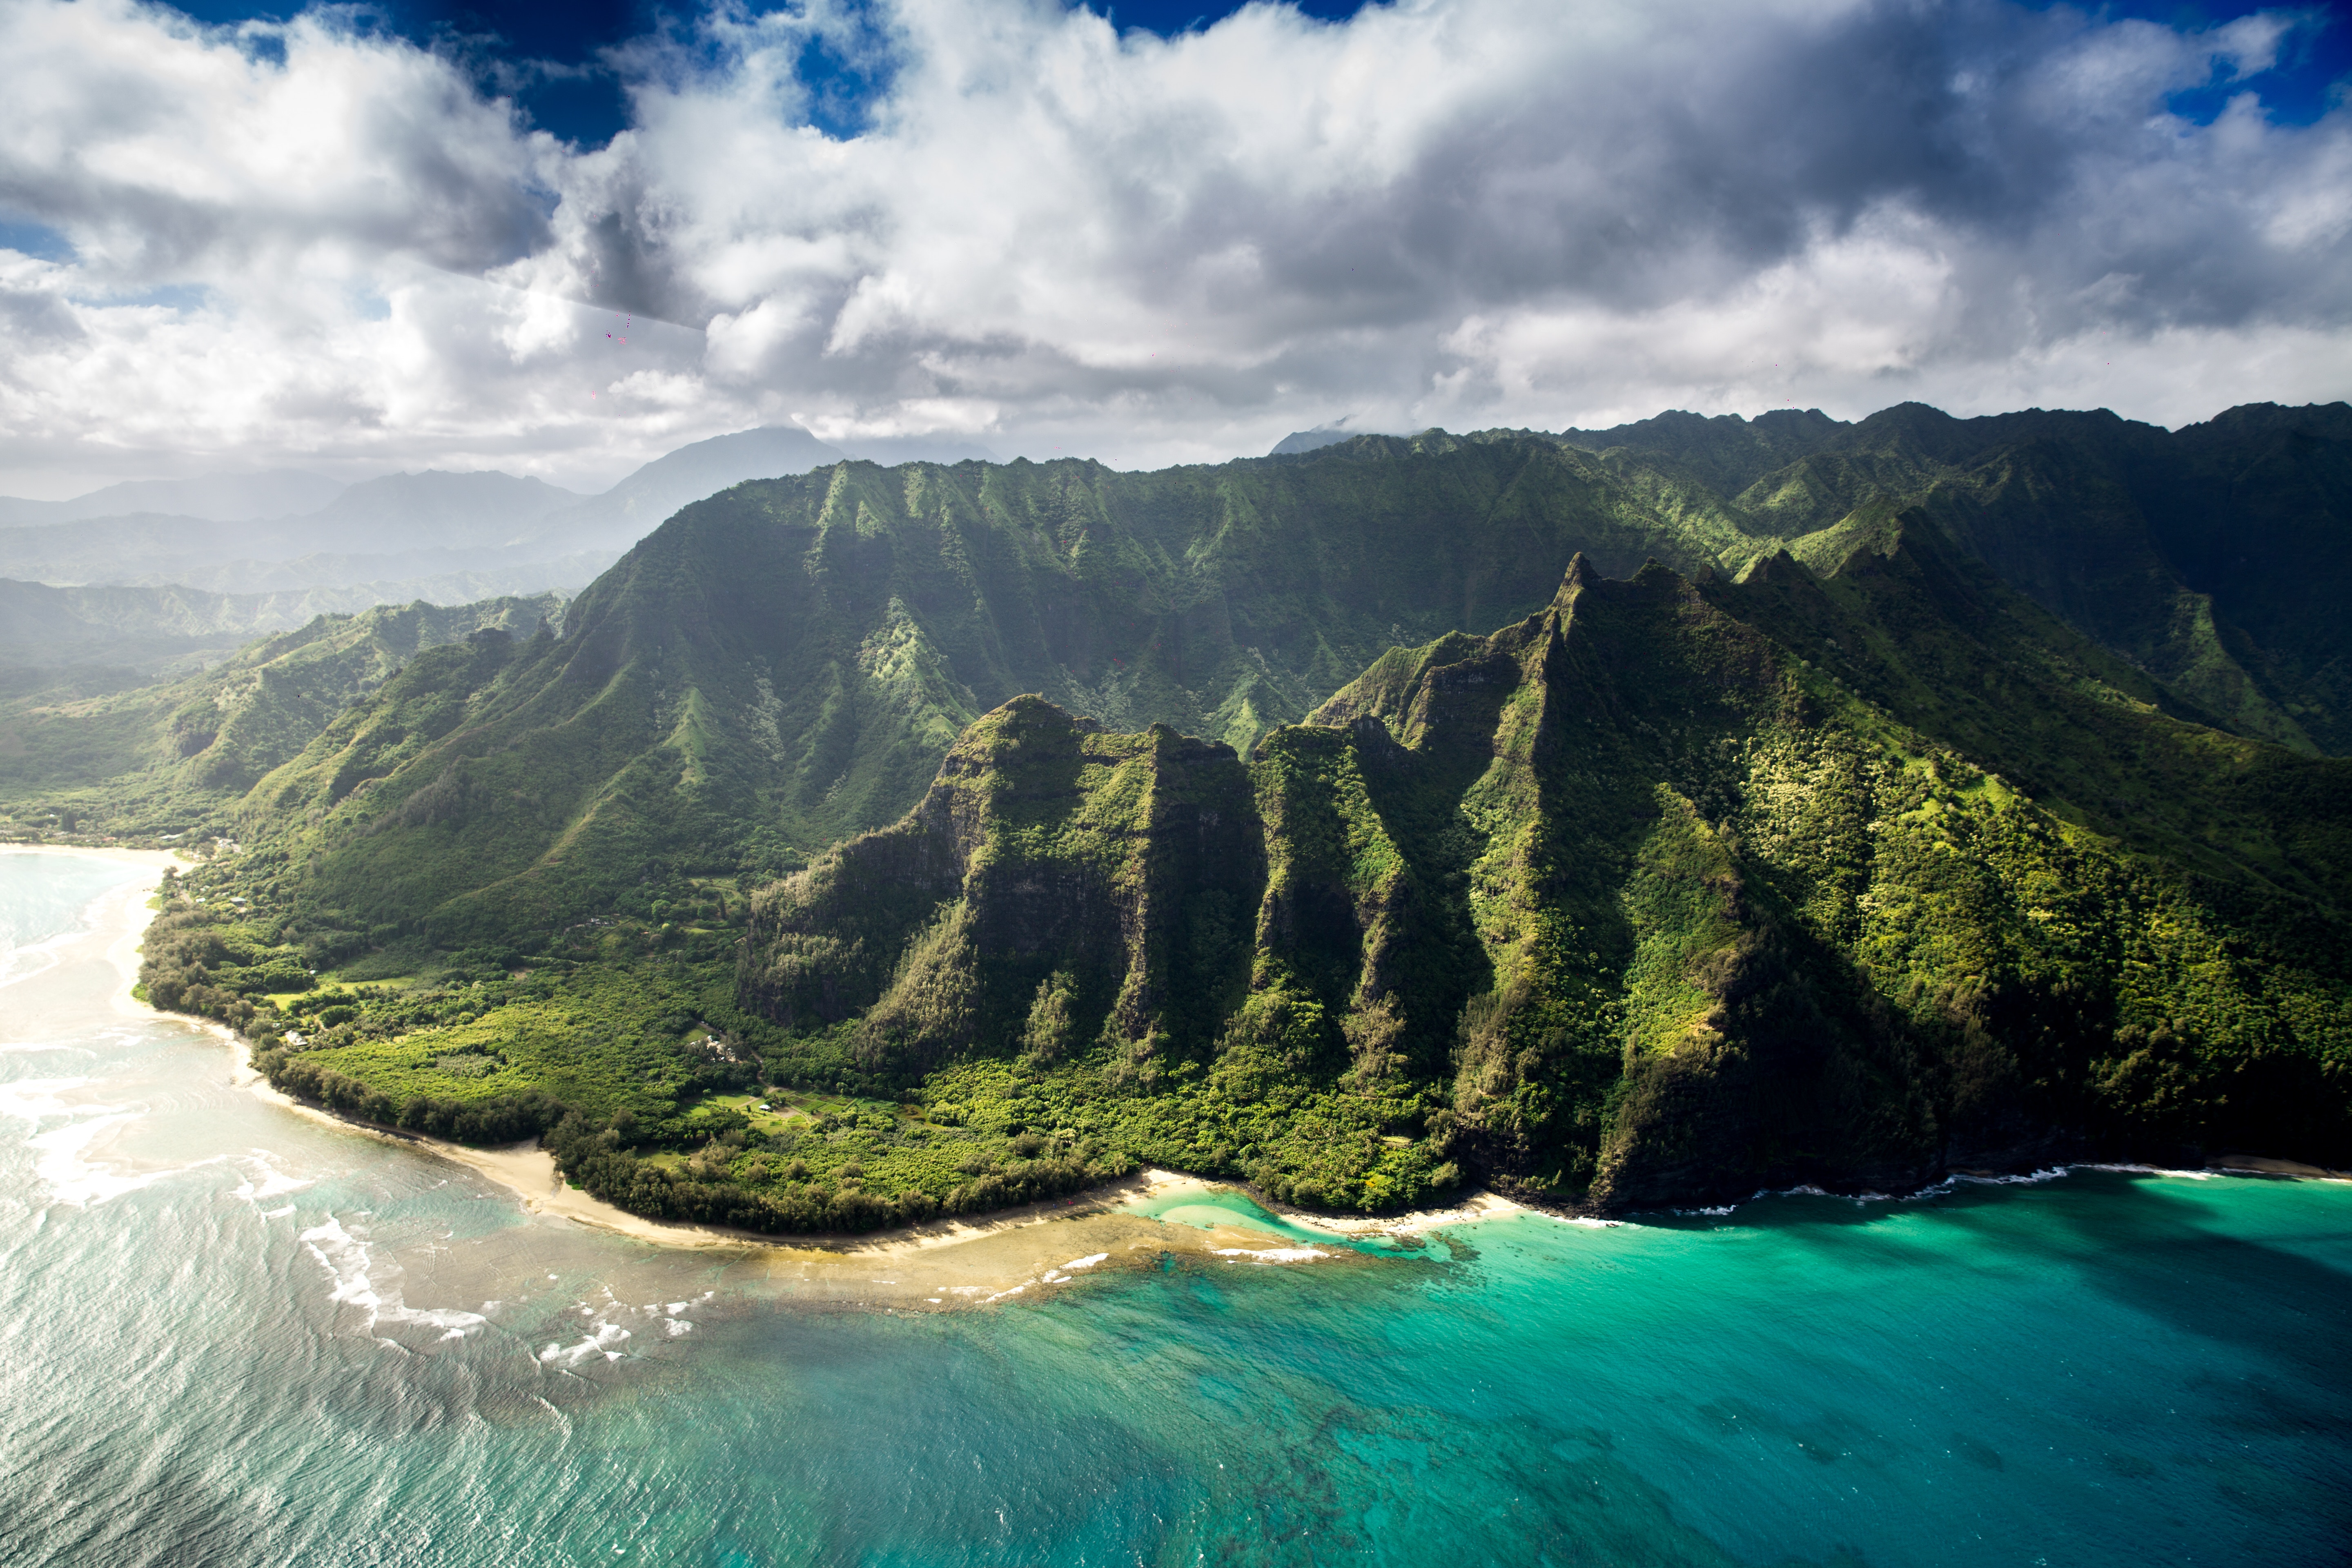 West Coast Flight Deal: Fly To Hawaii For Under $300